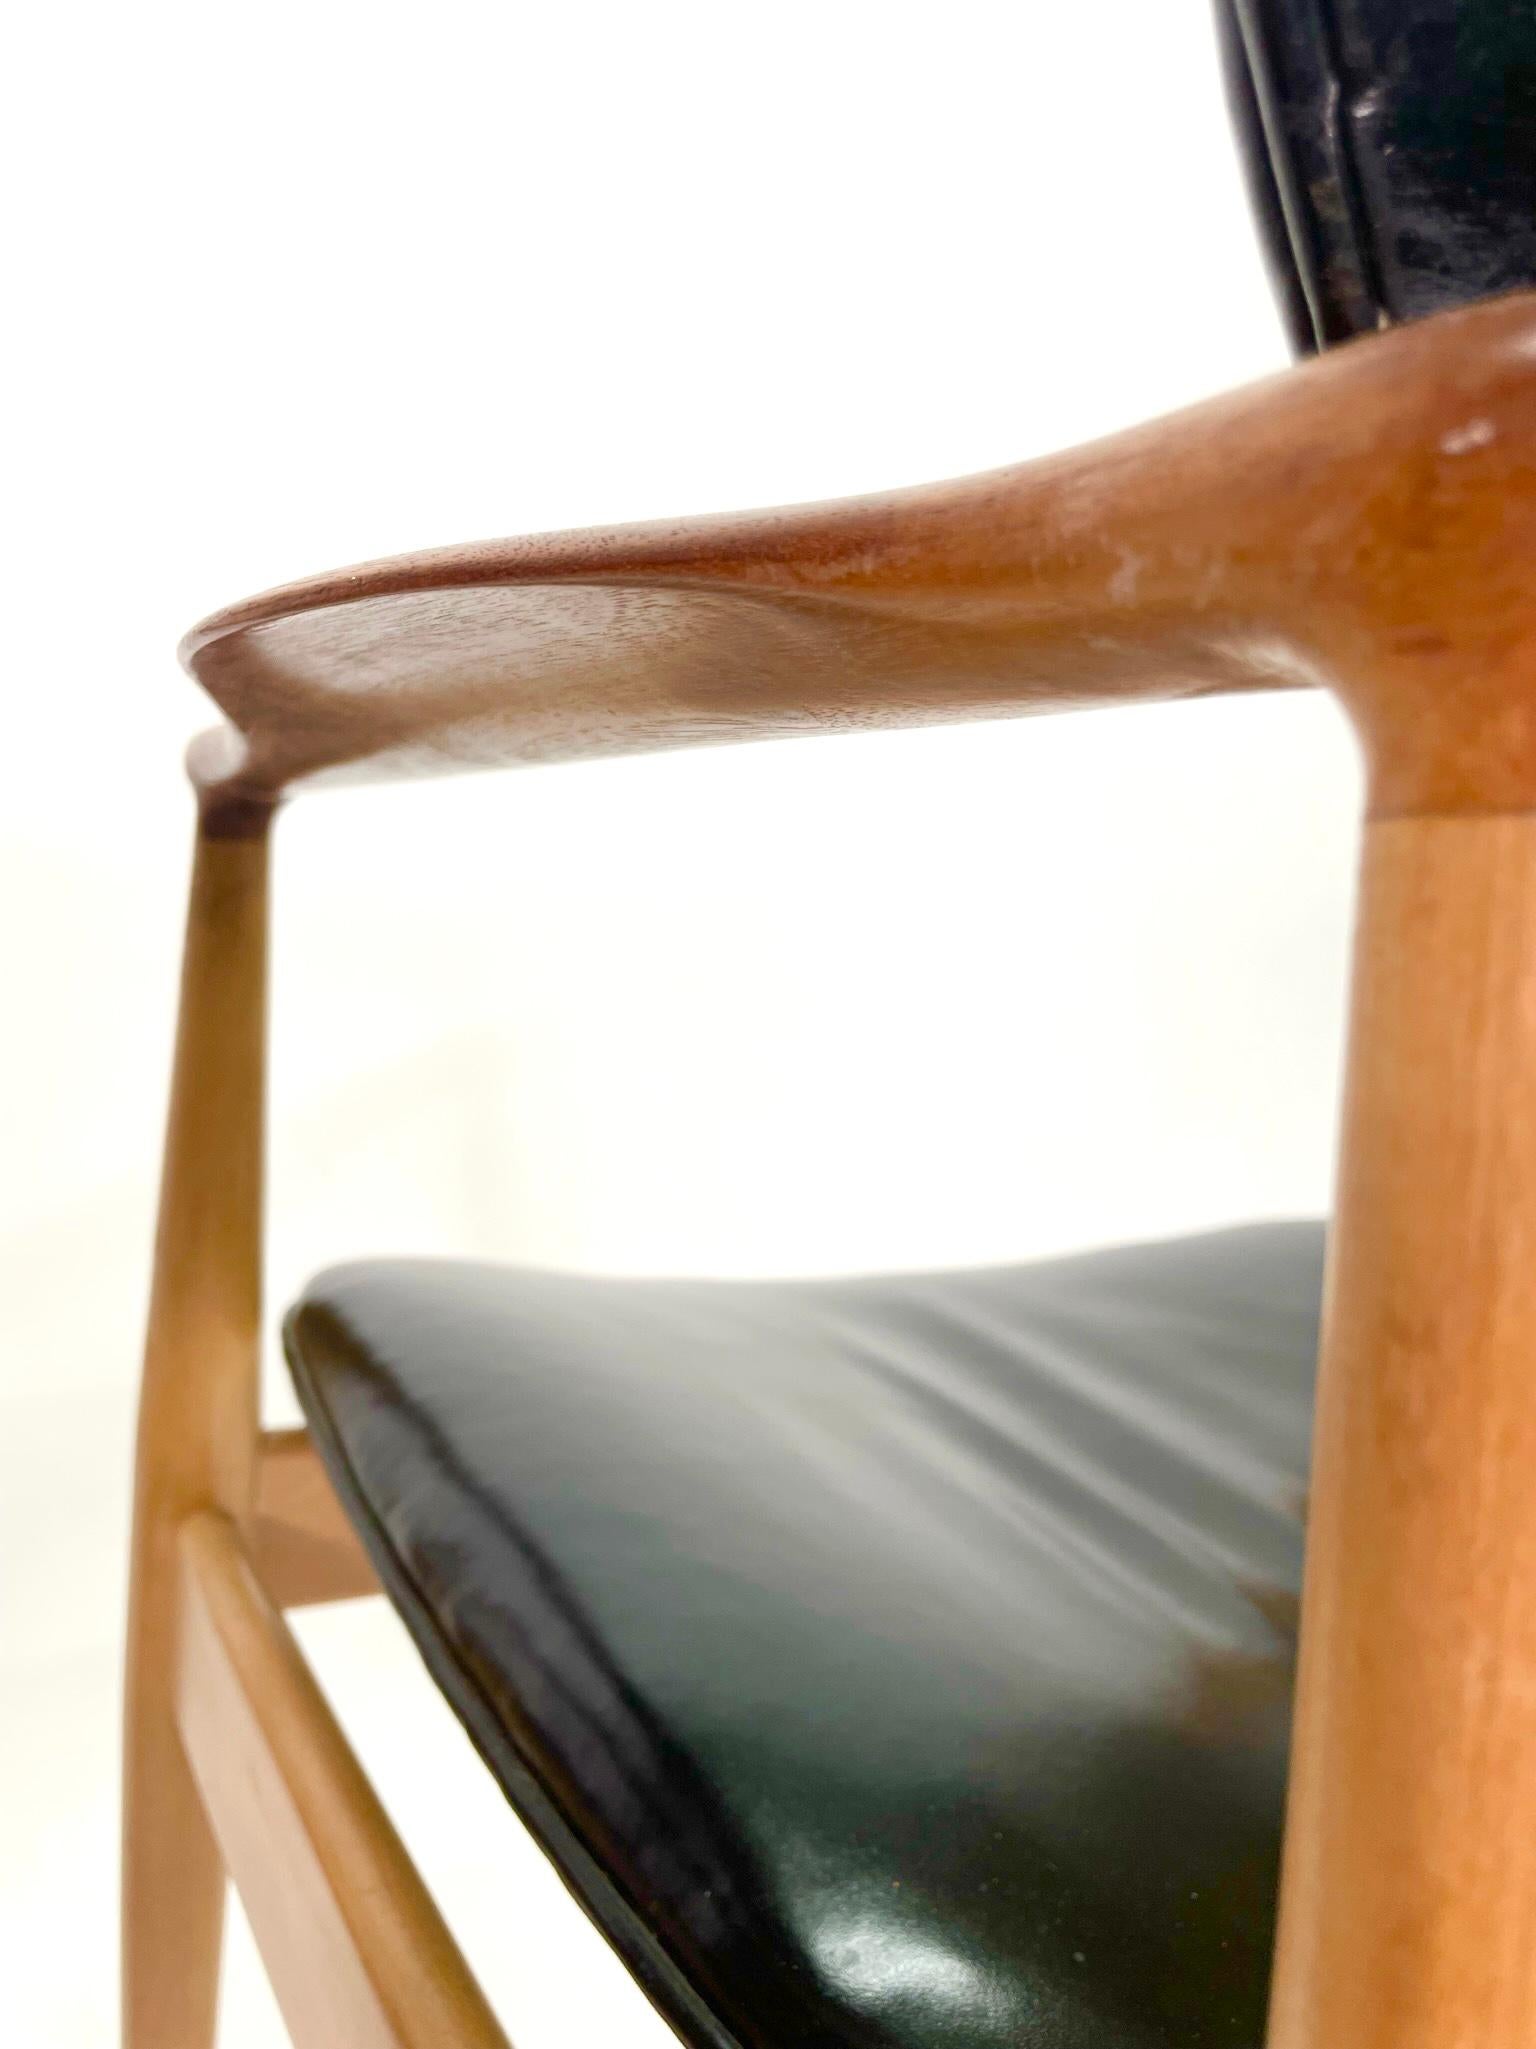 Leather Finn Juhl Model 48 Chair by Baker, in Teak and Maple (2 available) For Sale